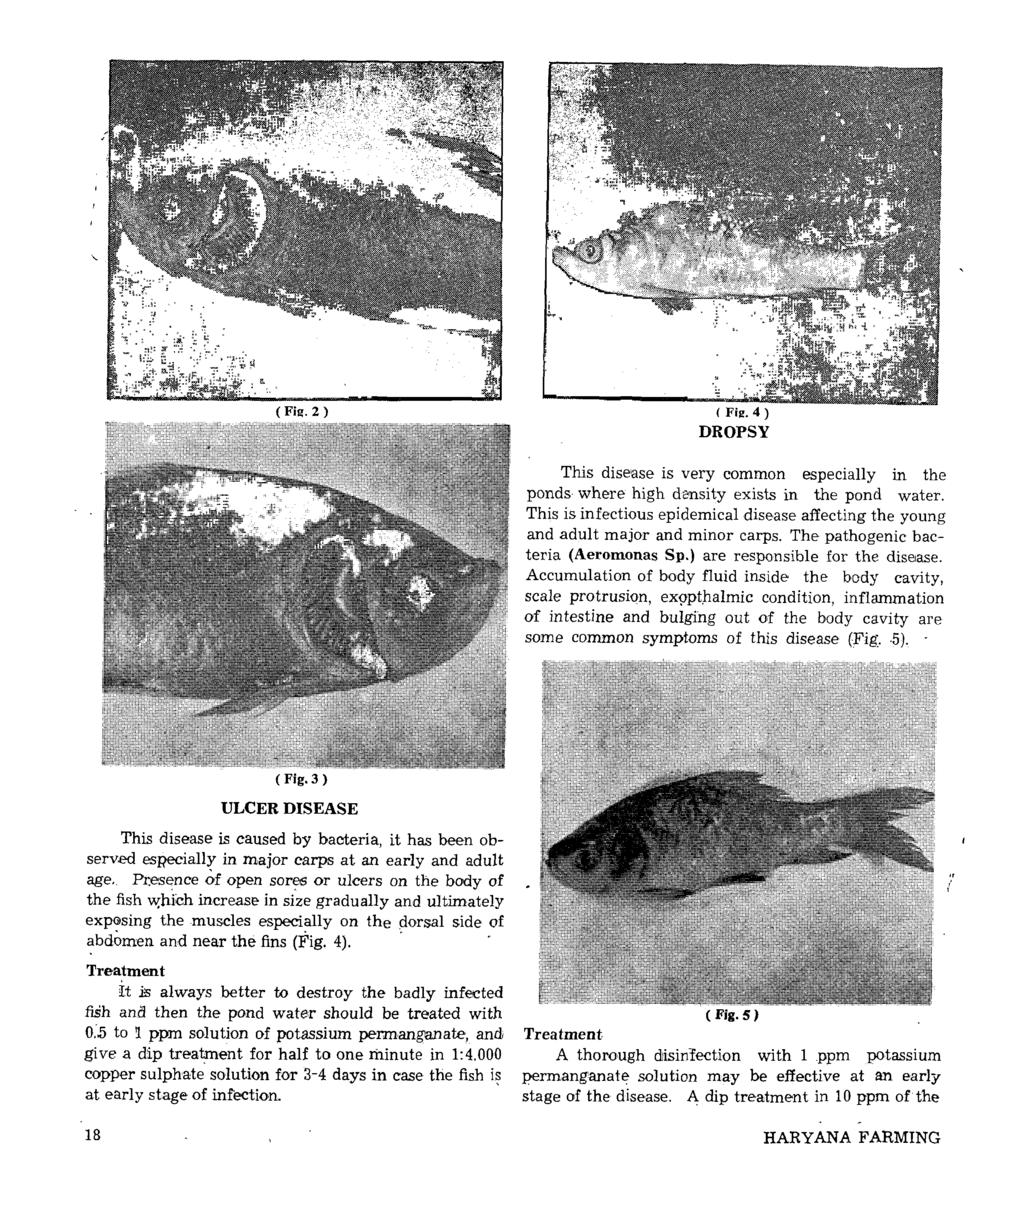 \. ( Fig. 4) DROPSY This disease is very common especially in the ponds where high density exists in the pond water.